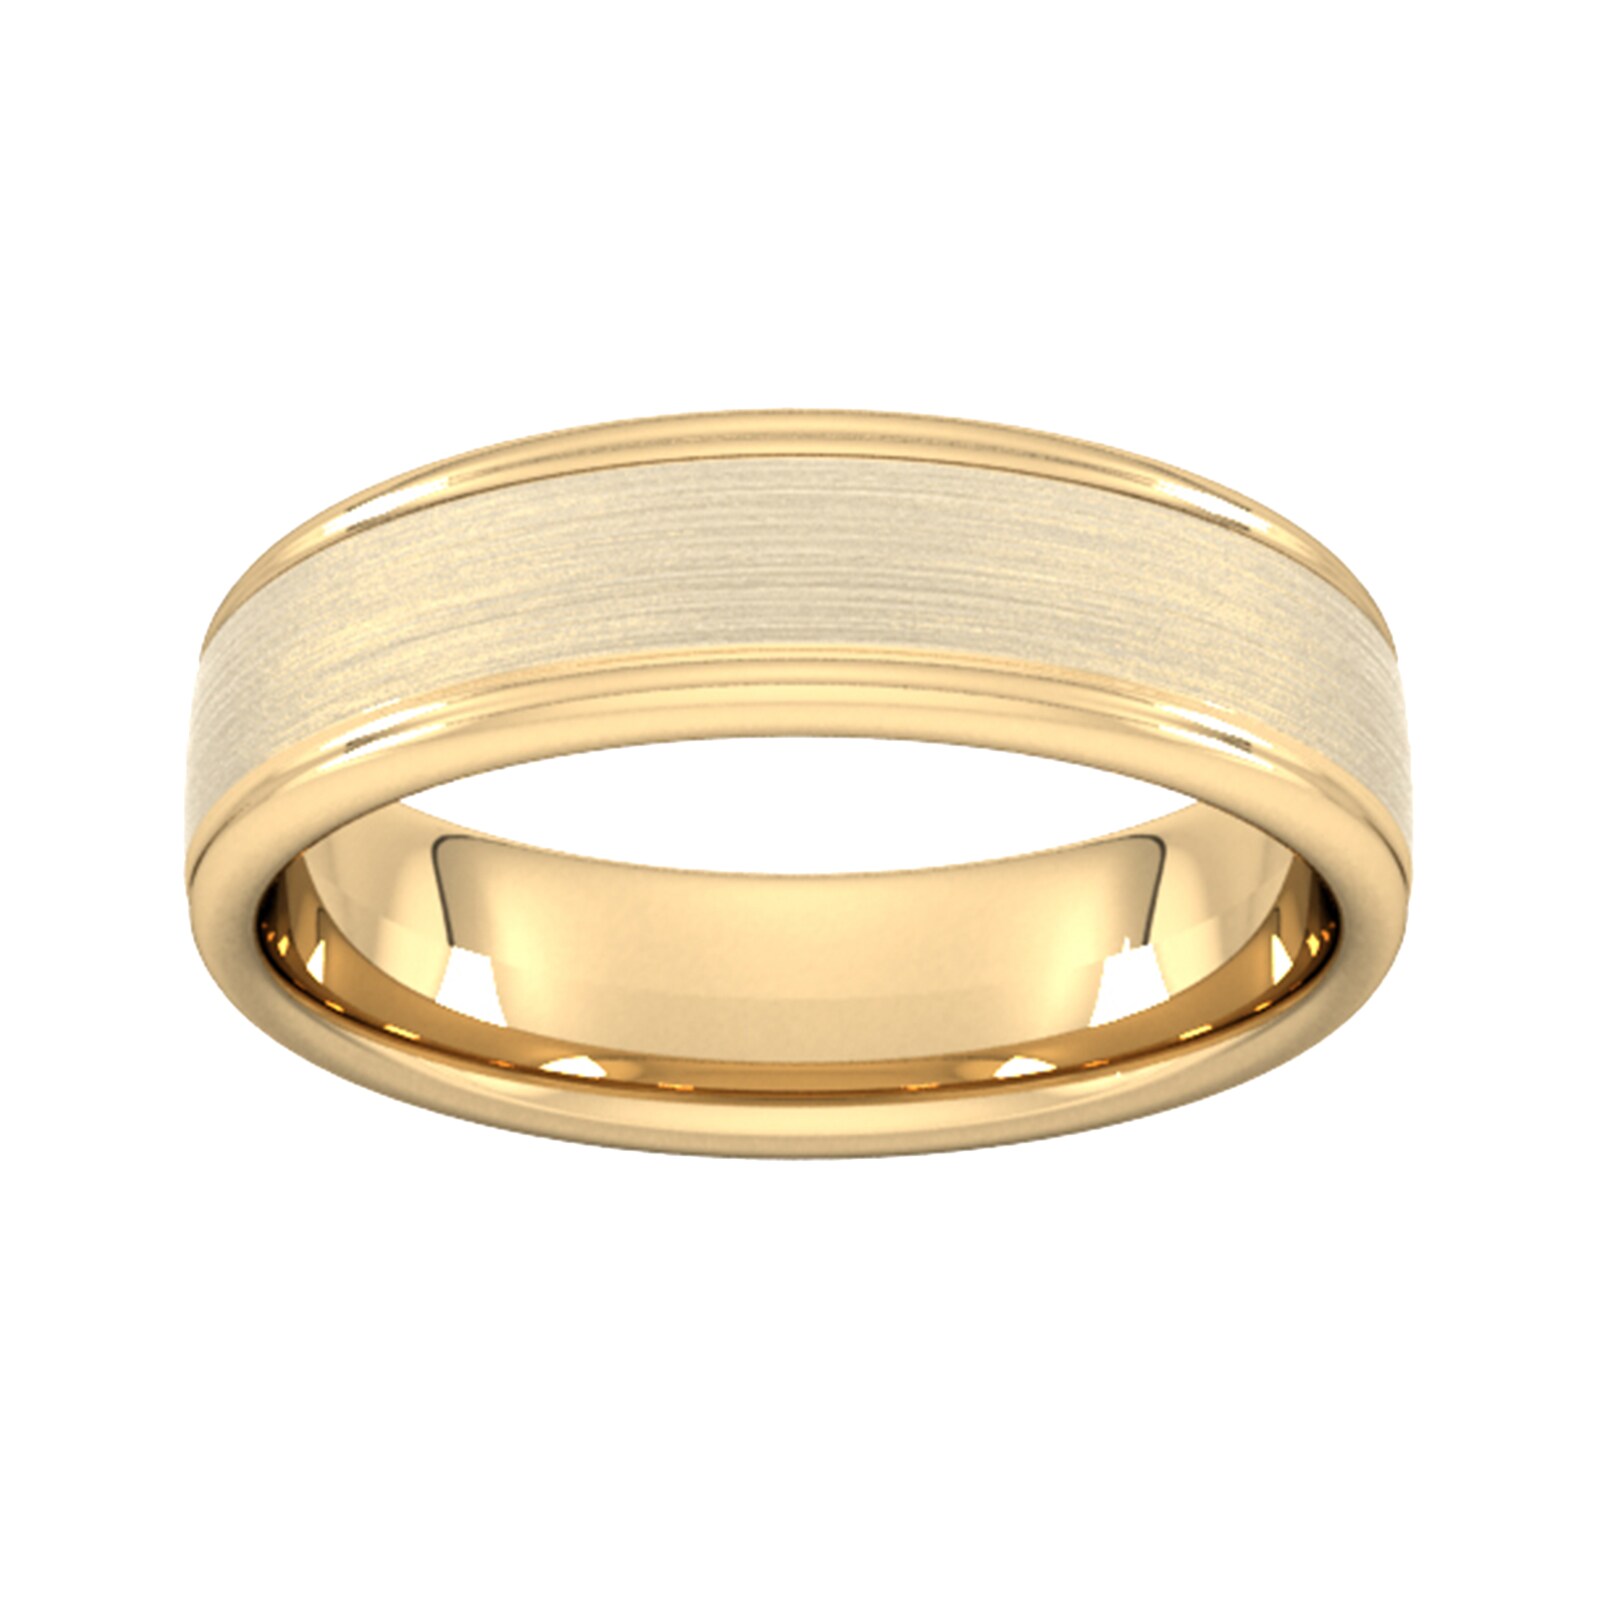 6mm D Shape Heavy Matt Centre With Grooves Wedding Ring In 9 Carat Yellow Gold - Ring Size I